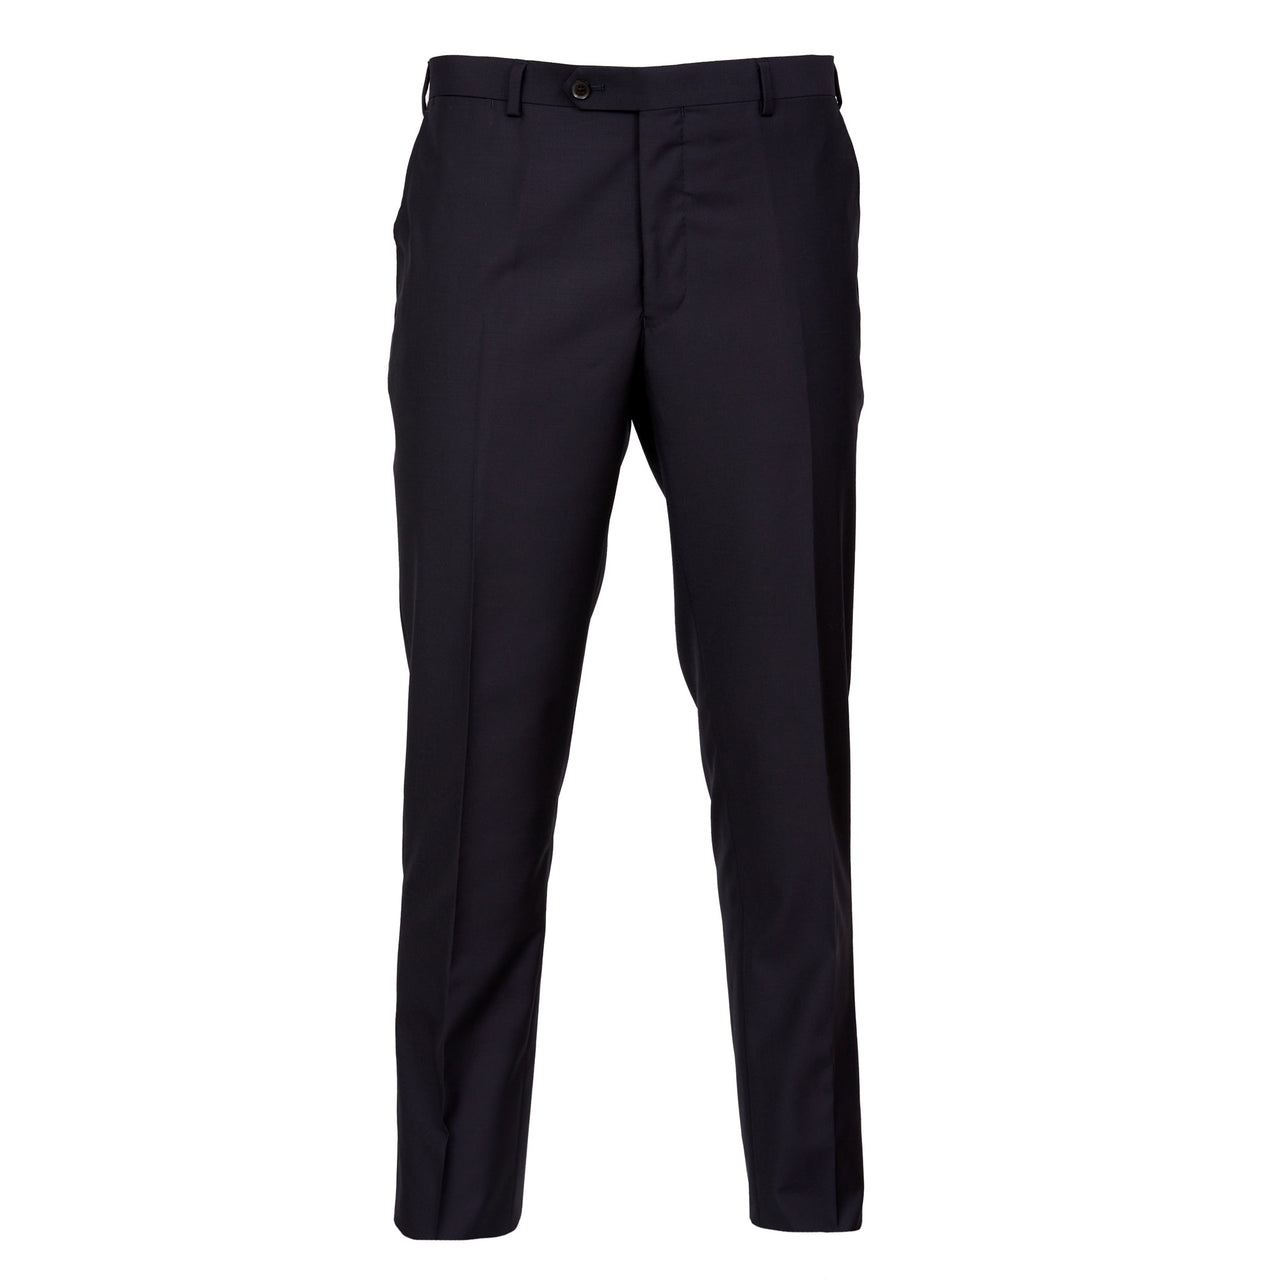 HENRY SARTORIAL Flat Front Wool Trousers NAVY REG